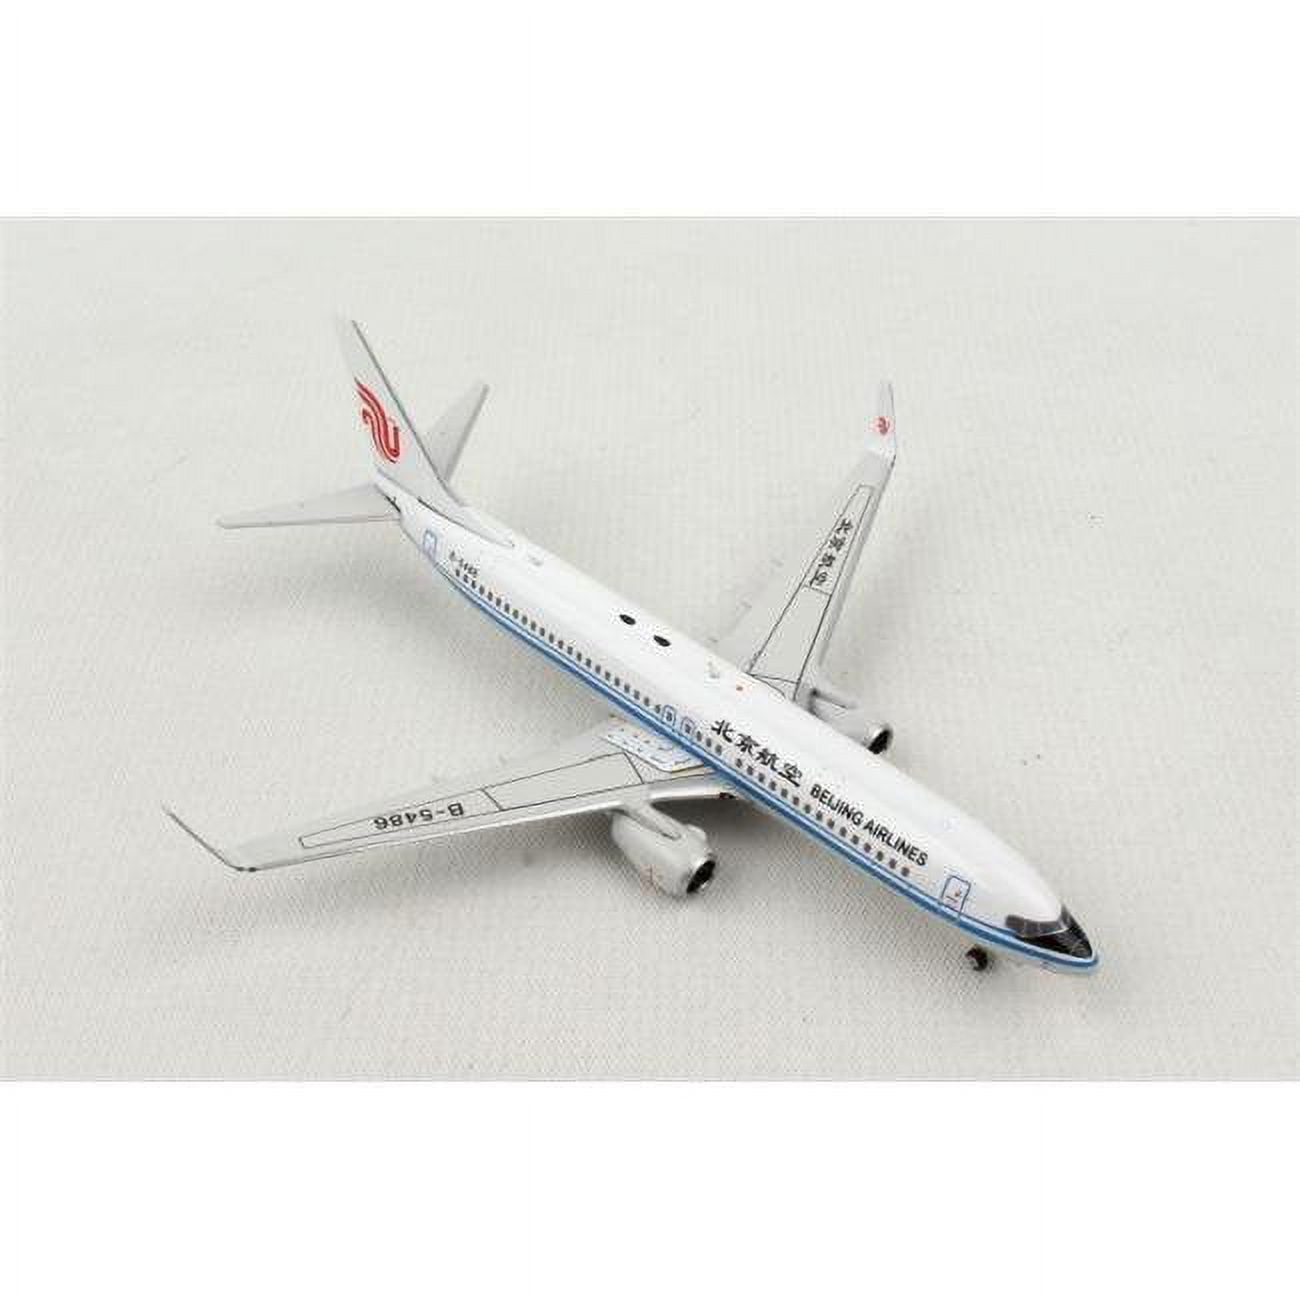 Ph1824 Beijing Airlines Boeing 737-800w Scale 1 By 400 Reg No. B-5486